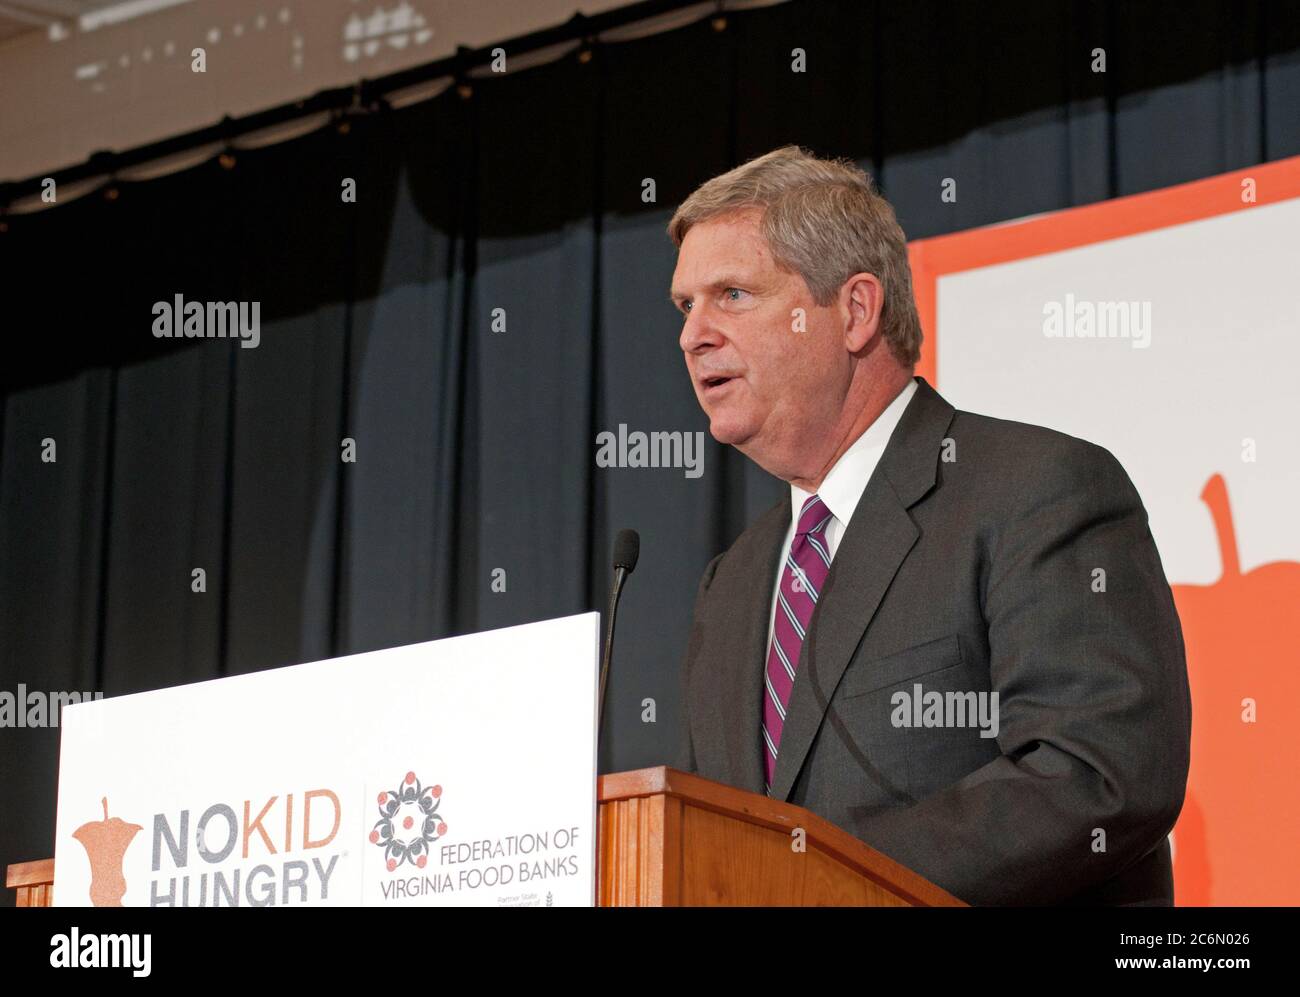 U.S. Department of Agriculture Secretary Tom Vilsack, helped launch the Virginia No Kid Hungry Campaign at Barcroft Elementary School in Arlington, VA, Tuesday, June 7, 2011. Vilsack said, “ We know our strength comes from out partnerships…” Campaign partners include Share our Strength, the Federation of Virginia Food Banks, corporate partners, education leaders, government agencies and community organizations. The Virginia Summer Meals for Kids Program is funded by the USDA and provides free summer meals at hundreds of sites across the Commonwealth of Virginia, but according to a new report r Stock Photo